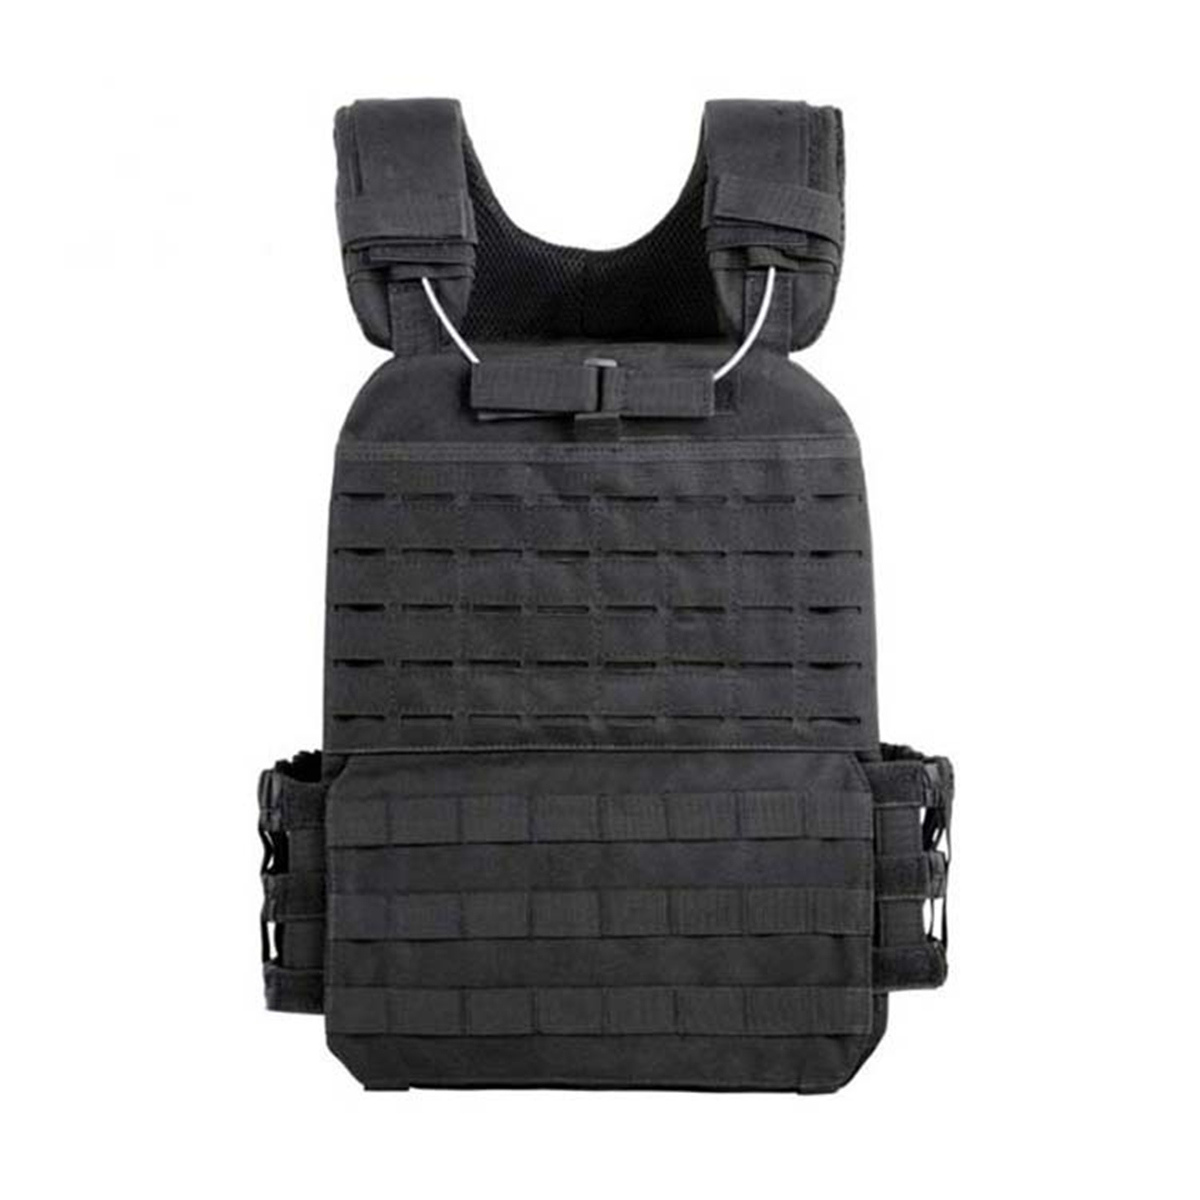 Outdoor-Adult-Tactical-TMC-Molle-Vest--Physical-Training-Sports-Fitness-Oxford-Weight-Waistcoat-1471093-3